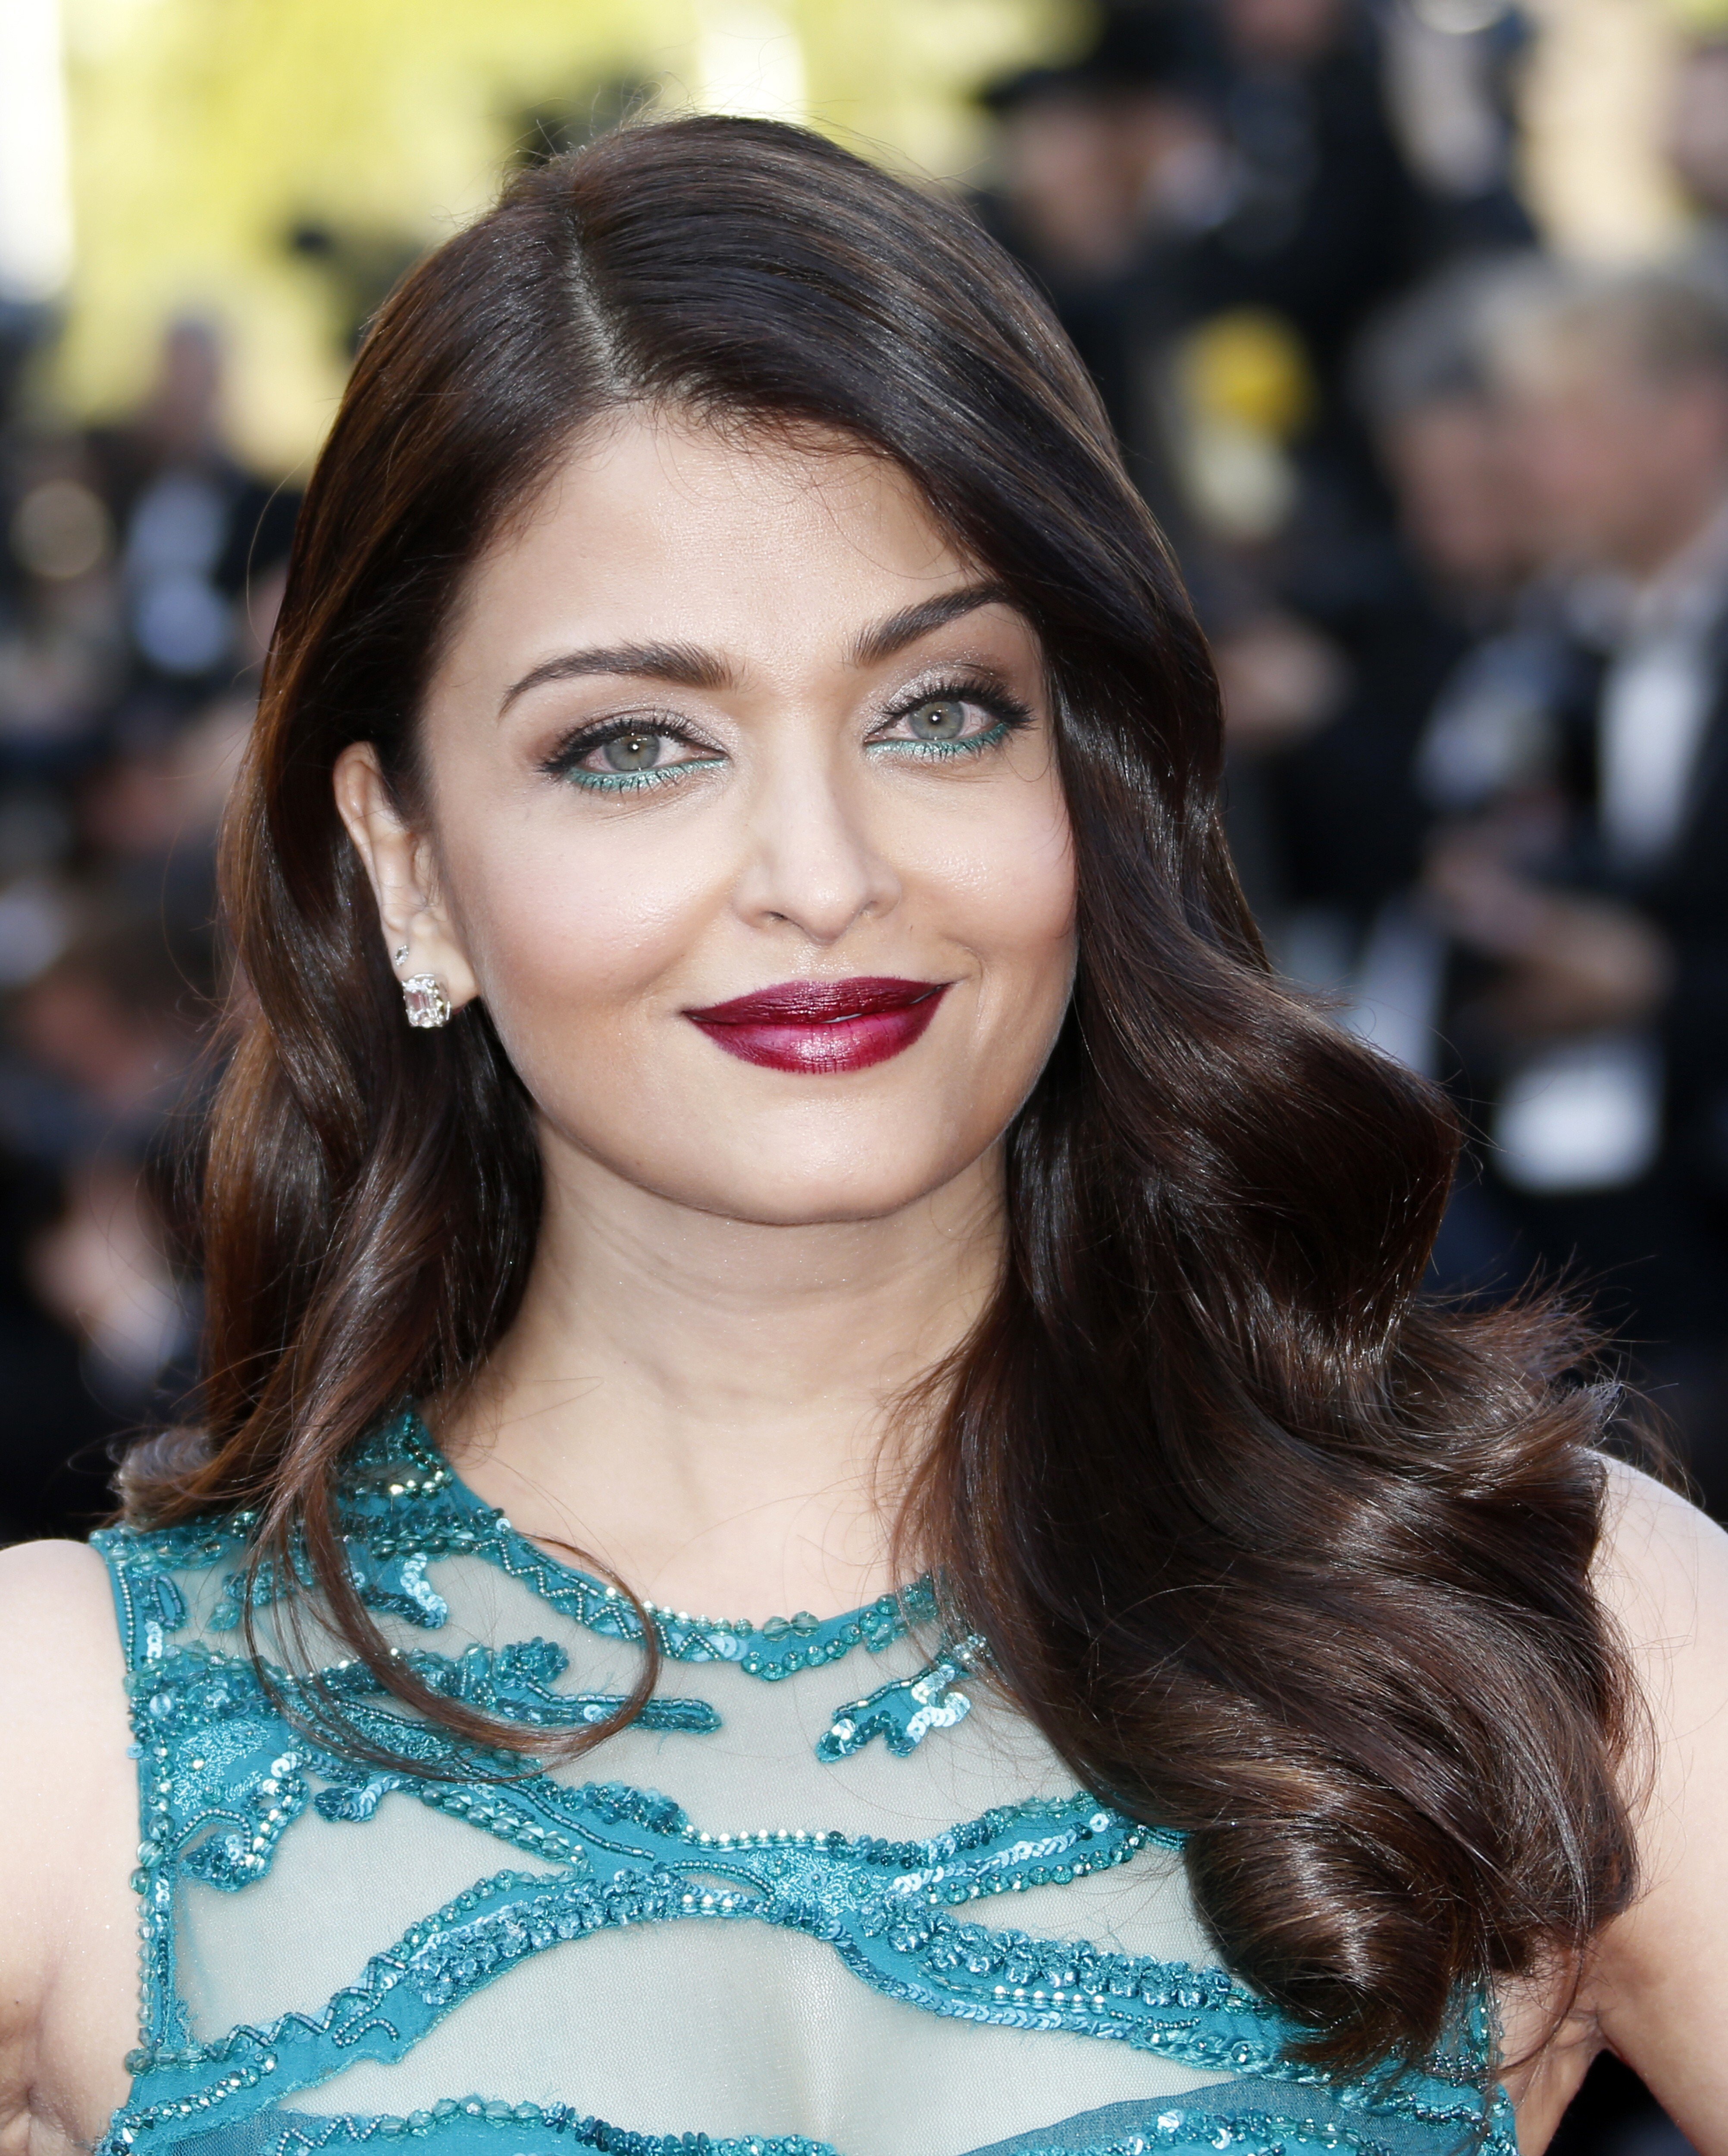 How Aishwarya Rai Bachchan went from blue-eyed schoolgirl beauty to Miss  World, to film superstar and one half of a Bollywood power couple with  husband Abhishek Bachchan | South China Morning Post